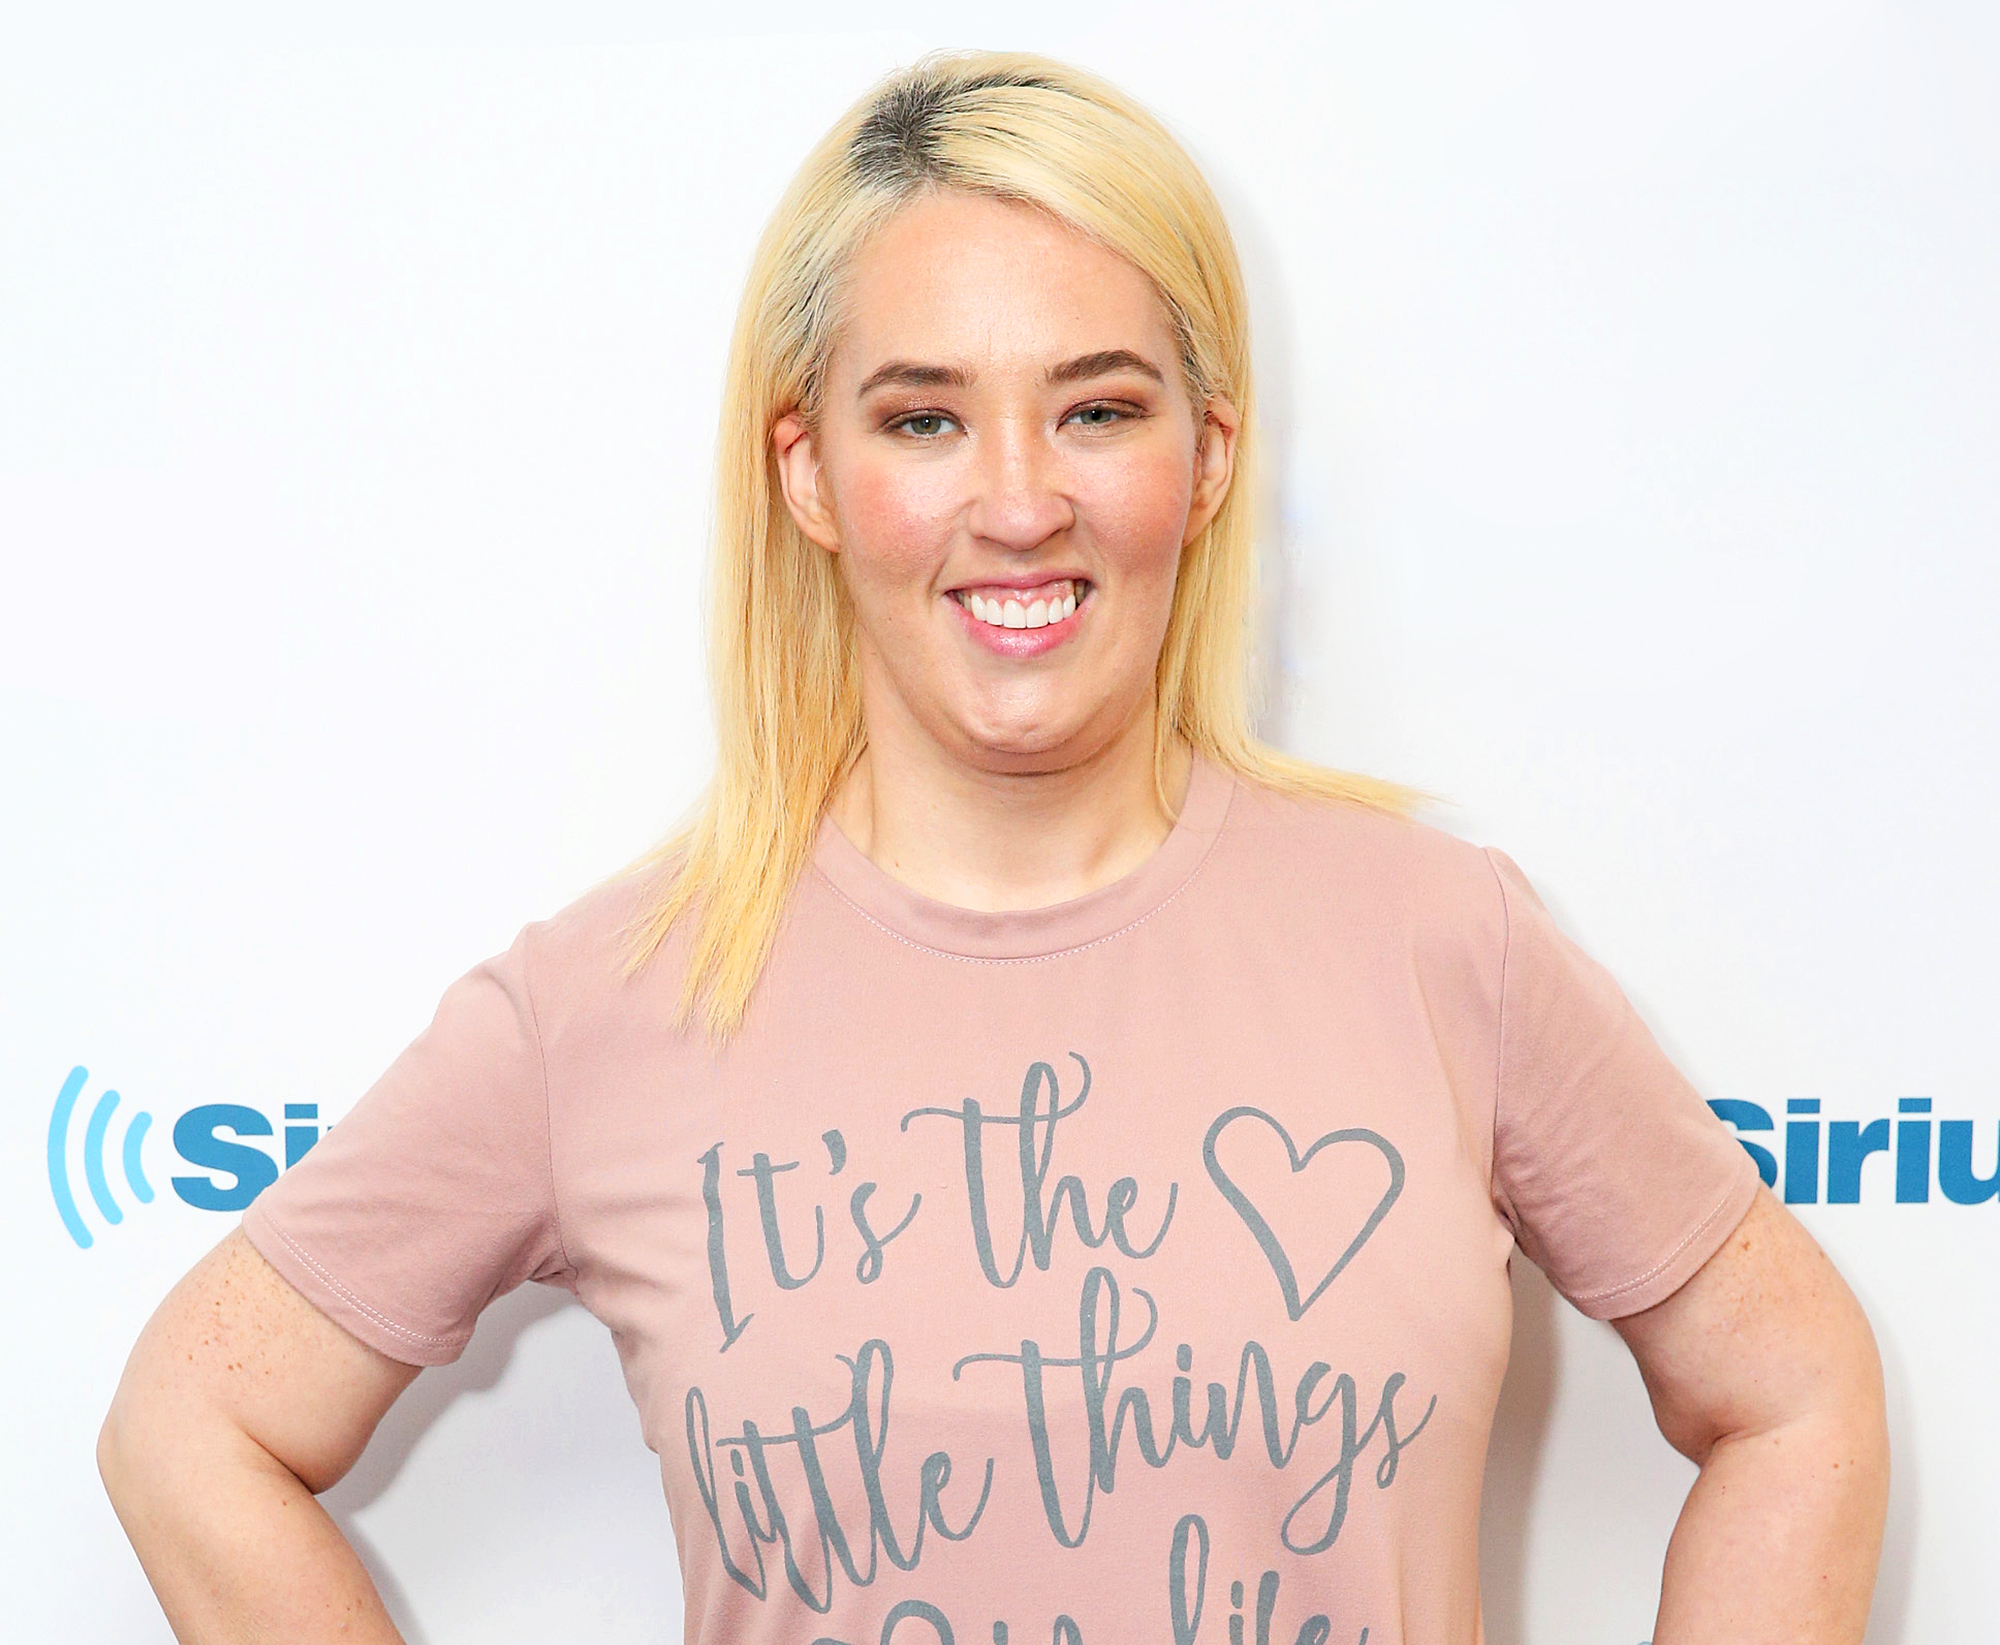 Mama June Shannon Will Introduce Her New Boyfriend During 'From Not to...